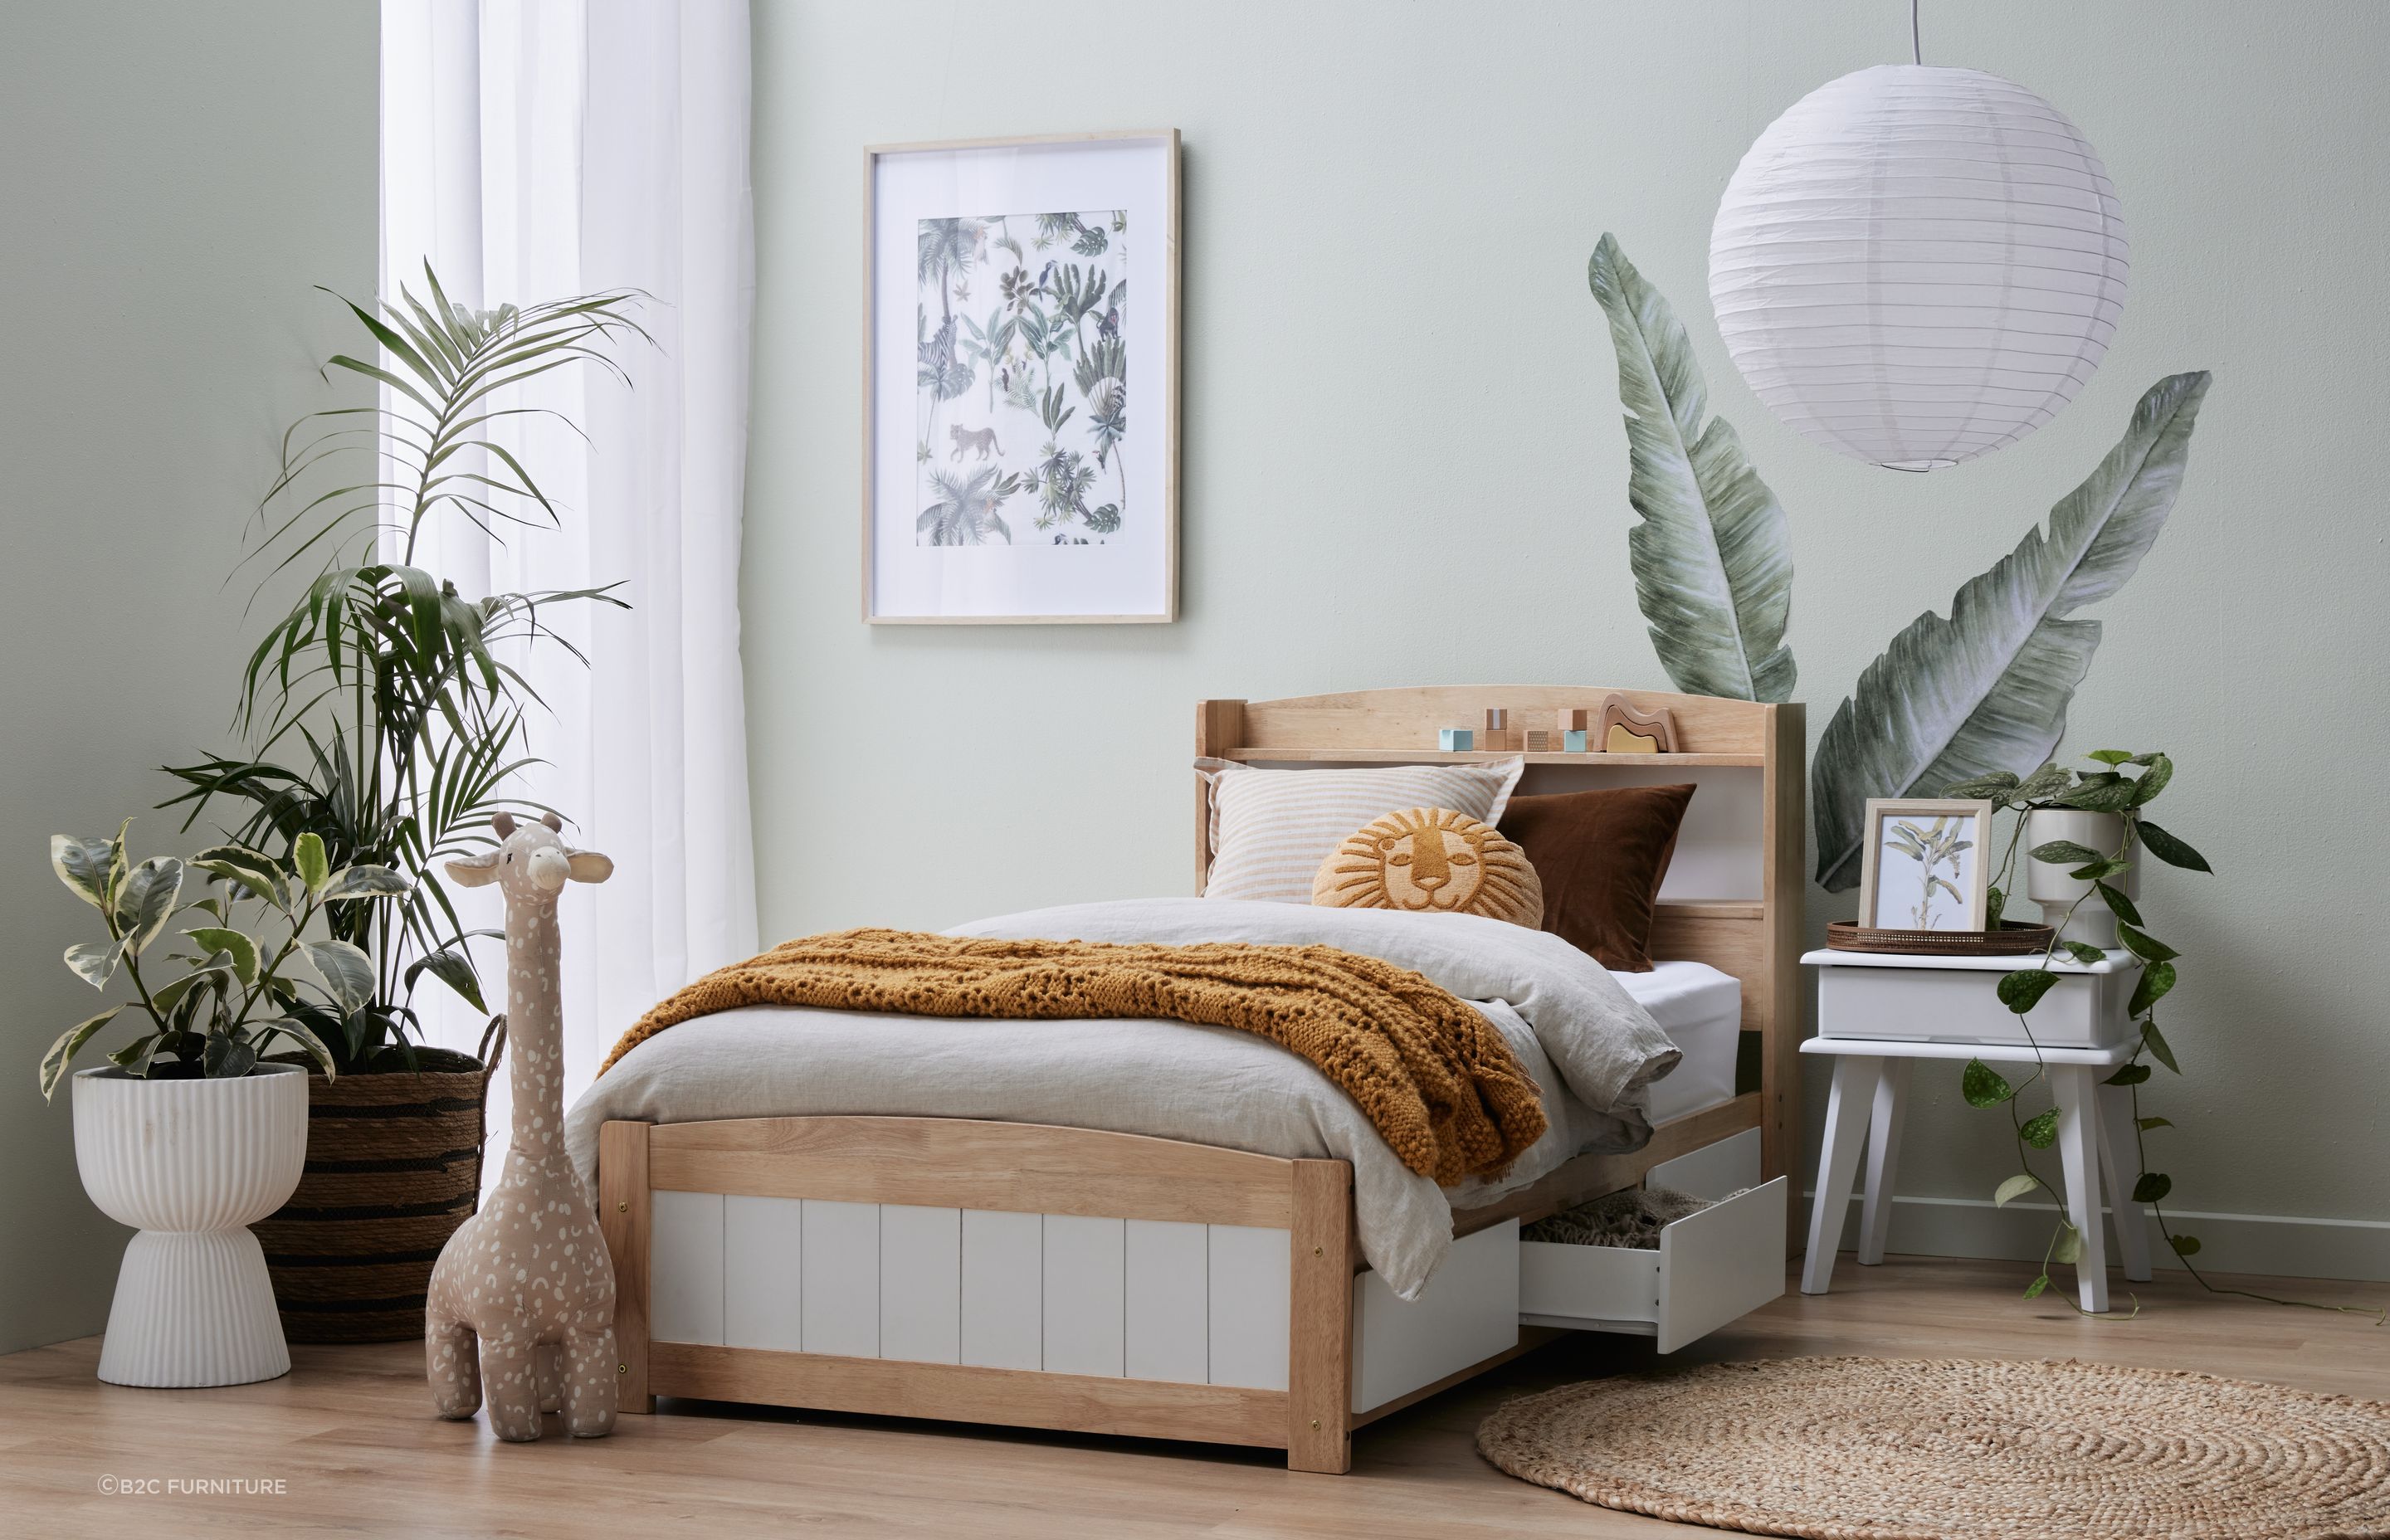 Options like this Rio Toddler Single Storage Bed with Hardwood Frame are the perfect addition to any children's bedroom